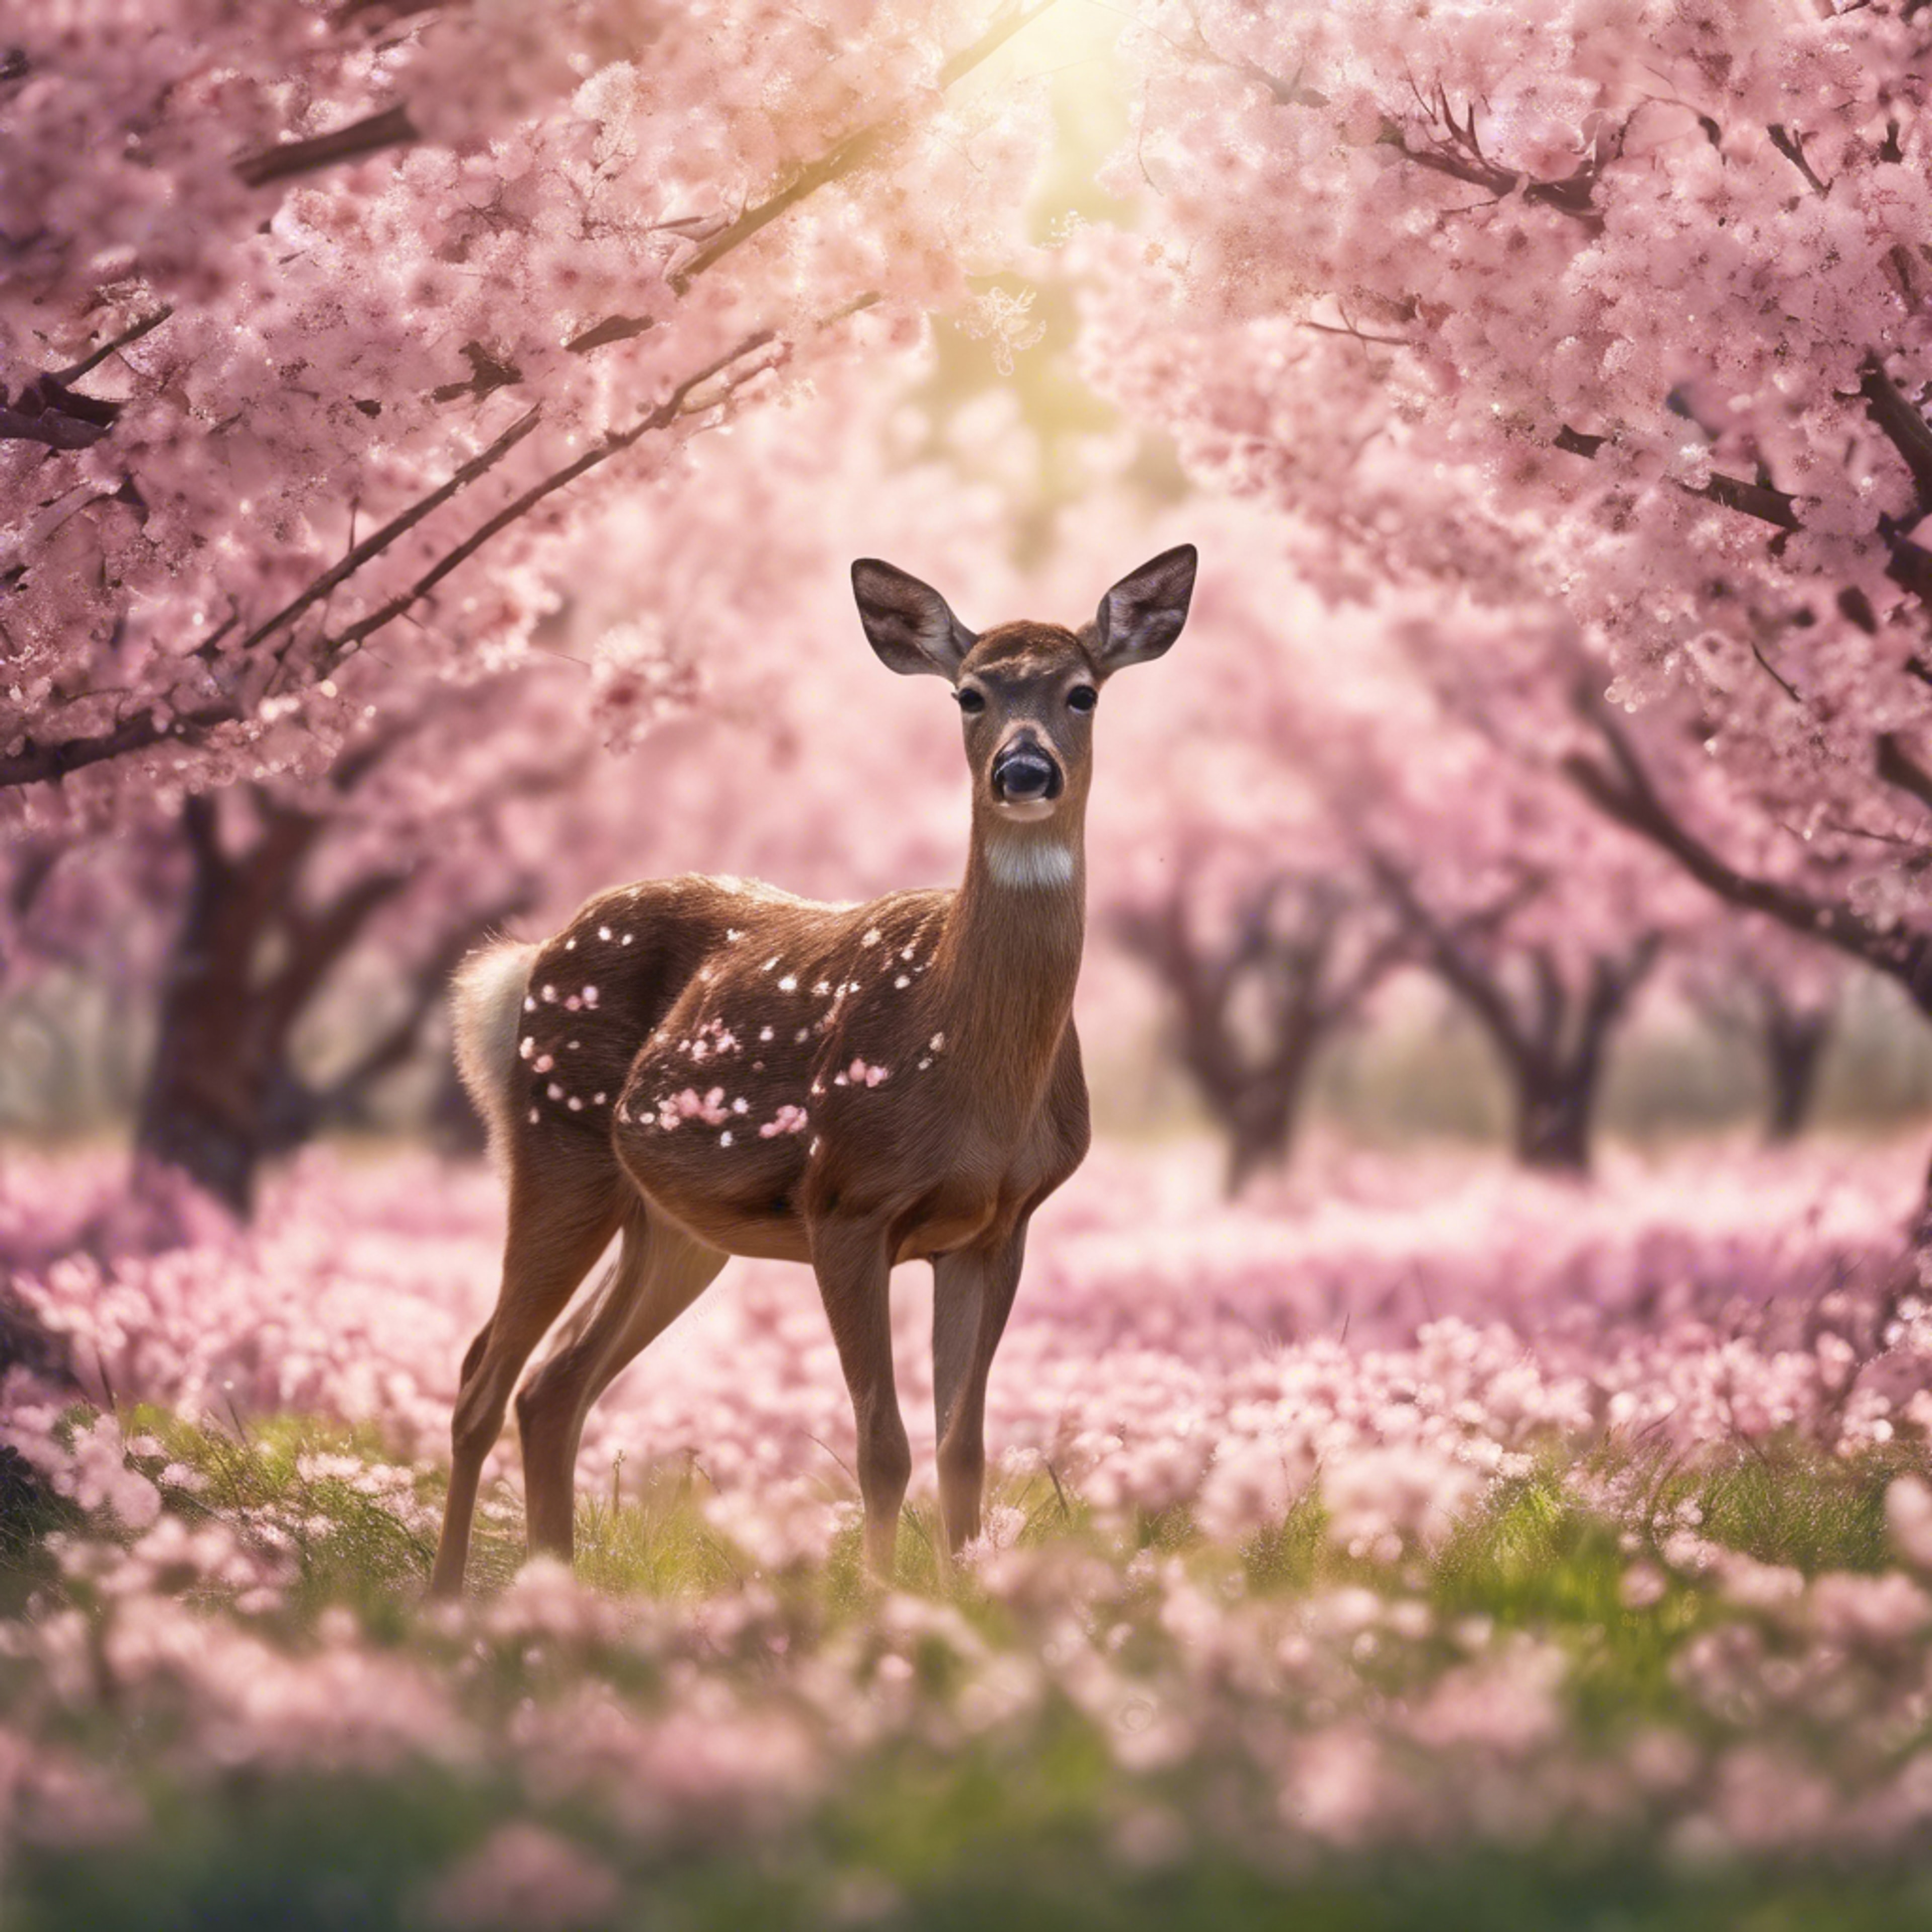 An illustration of a young deer grazing in a field of blooming cherry trees. Tapet[a2b025554c3c4b6aabc3]